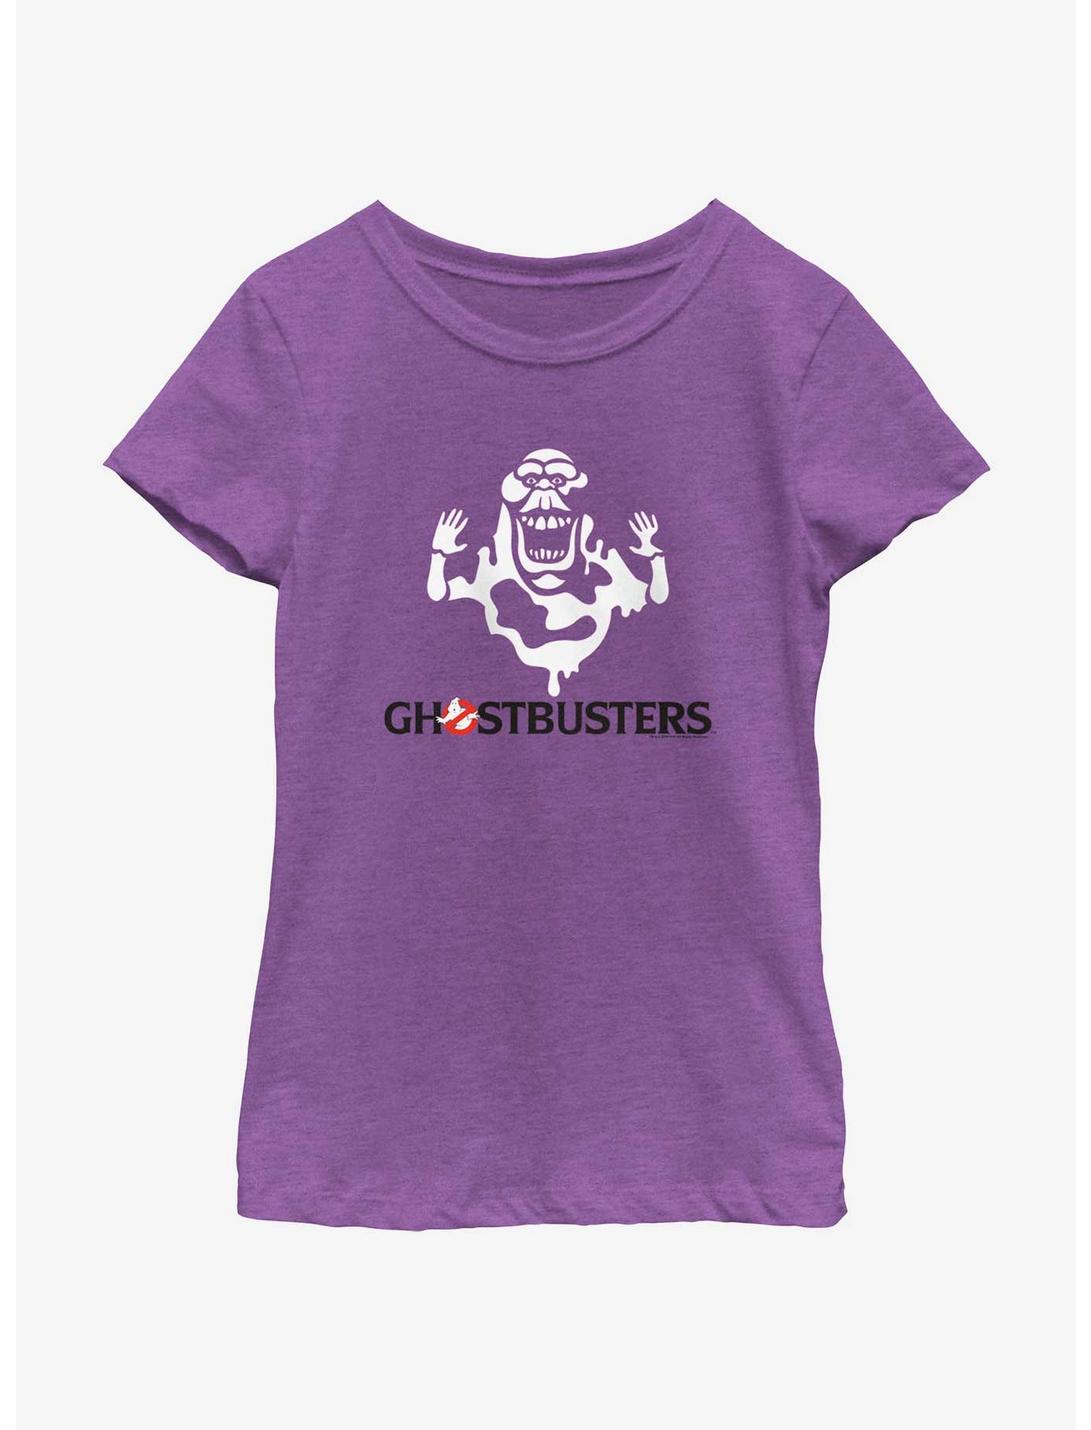 Ghostbusters: Frozen Empire Decal Slimer Girls Youth T-Shirt, PURPLE BERRY, hi-res